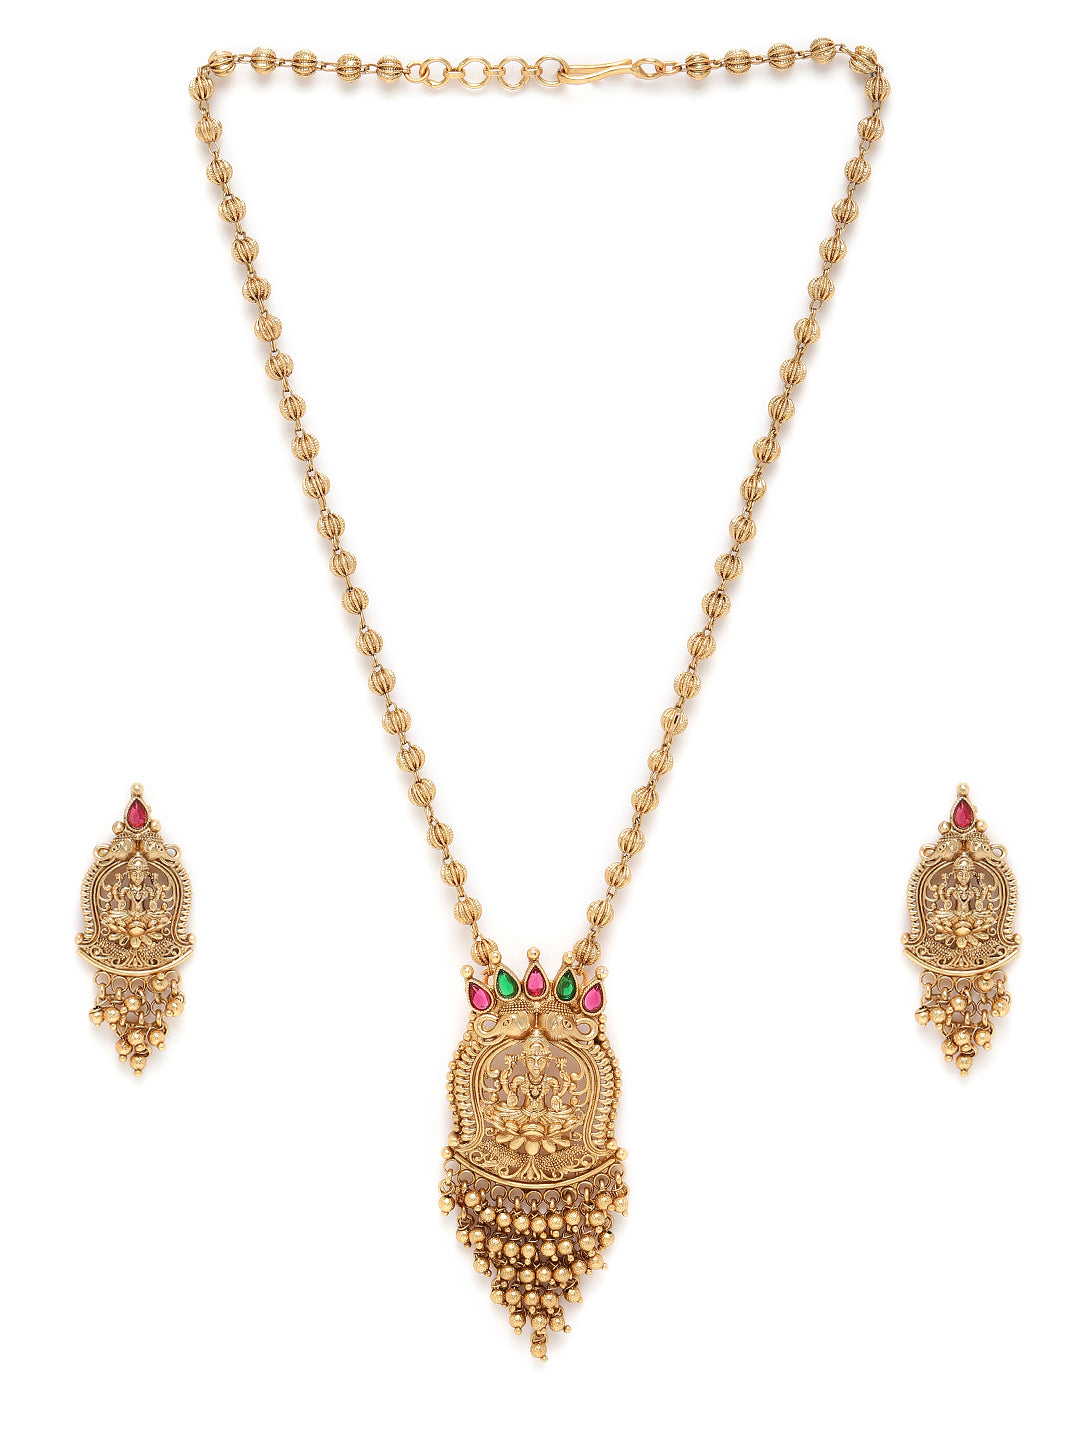 Premium Gold Finish Pendent Set with pearls and AD Stones 22127N